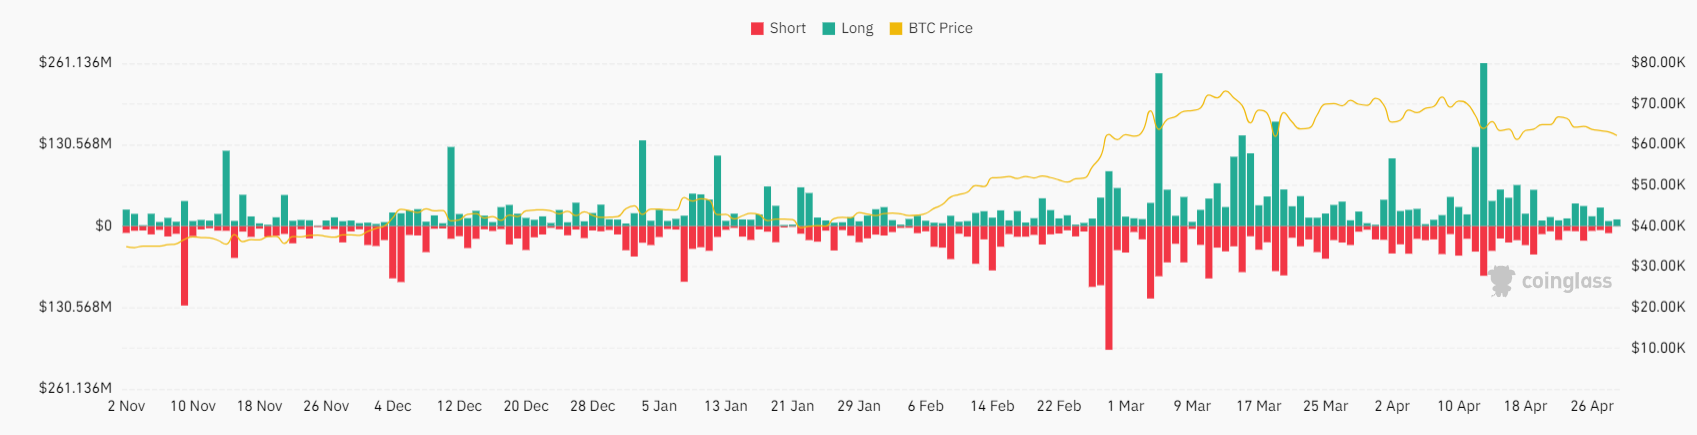 Market research report: Bitcoin falls to 62.5 with Fed rate cut expectations & tech earnings in focus; BTC ETF outflows & ETH fees drop - liquidations